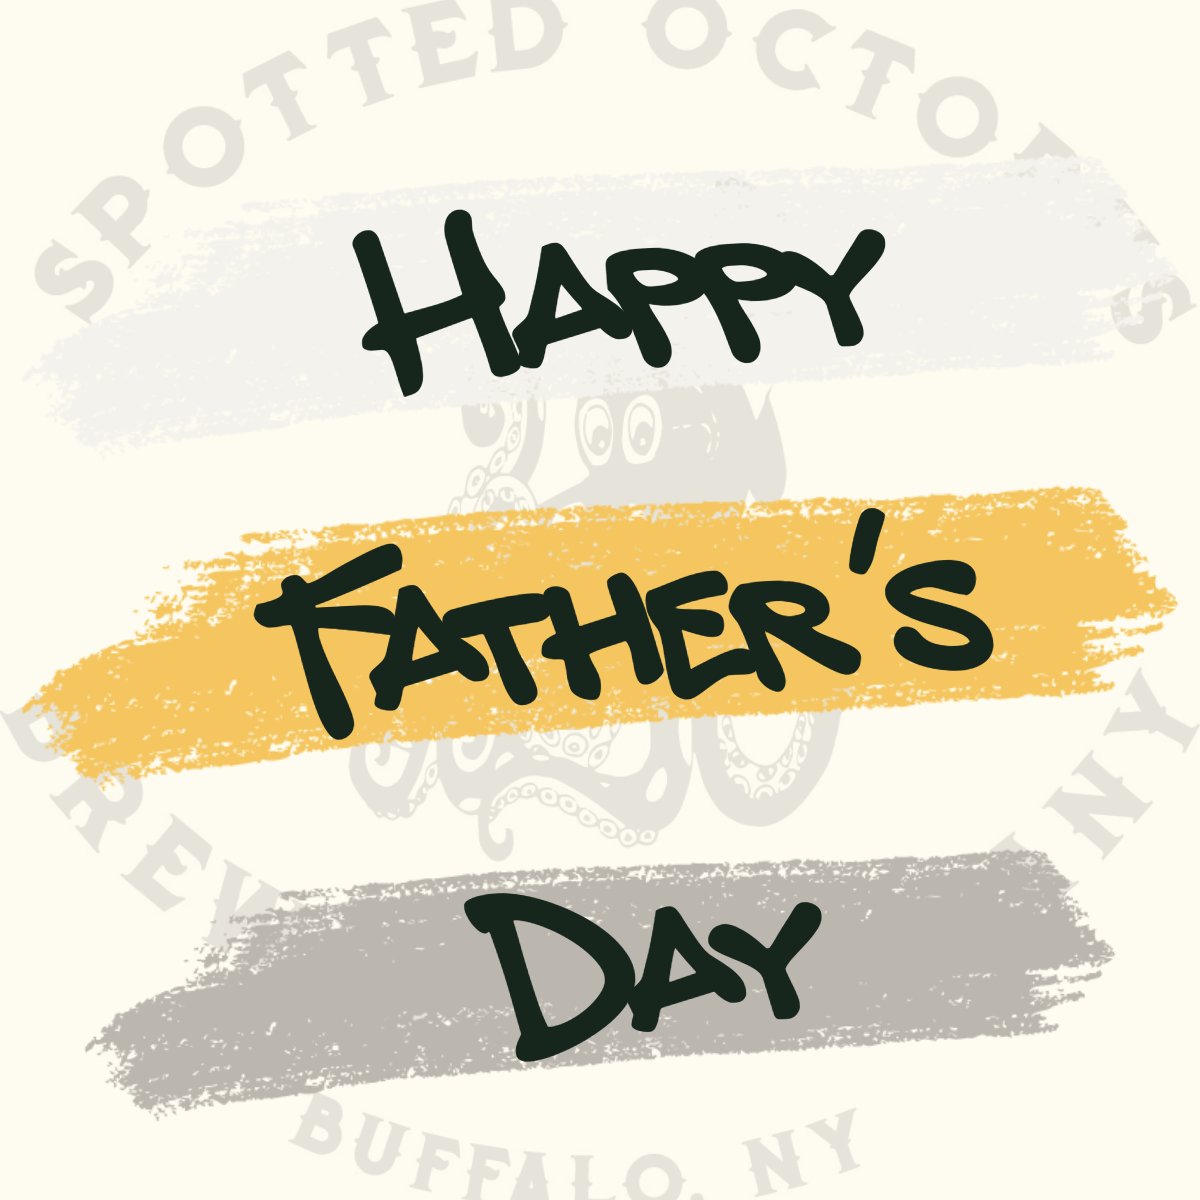 🍺Happy Father's Day🍻

#fathersday #buffalony #drinklocal #supportlocal #localcraftbeer #craftnotcrap #sunday #drinklocalbeer #spottedoctopus #breweryhopping